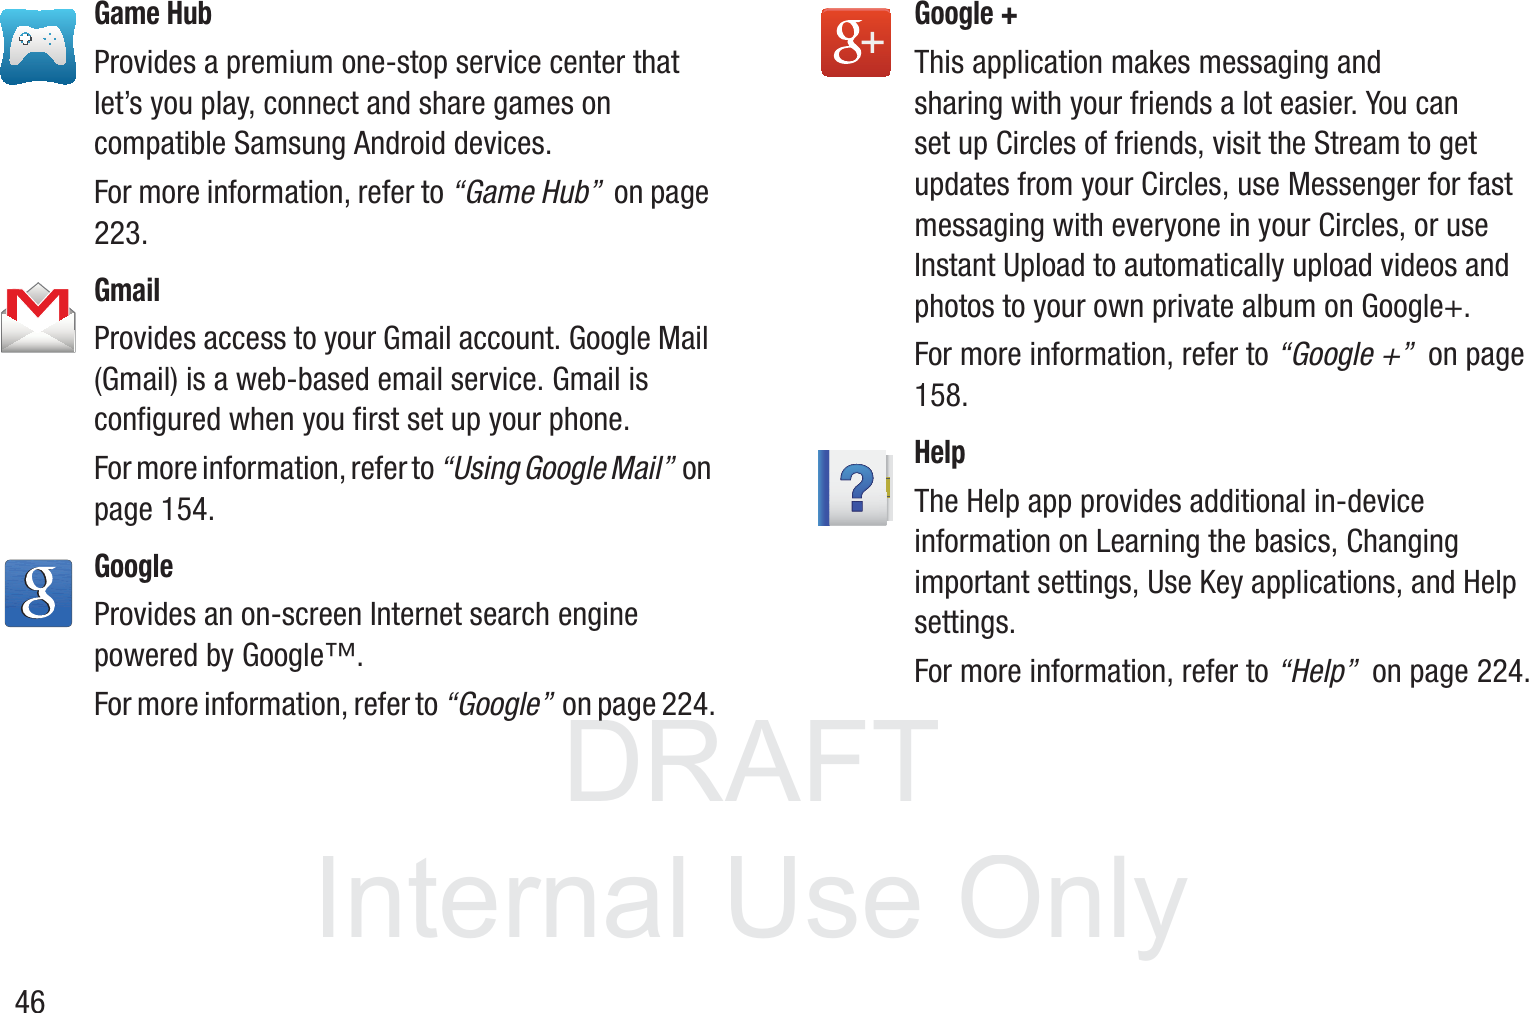 DRAFT InternalUse Only46Game HubProvides a premium one-stop service center that let’s you play, connect and share games on compatible Samsung Android devices.For more information, refer to “Game Hub”  on page 223.GmailProvides access to your Gmail account. Google Mail (Gmail) is a web-based email service. Gmail is configured when you first set up your phone. For more information, refer to “Using Google Mail”  on page 154.GoogleProvides an on-screen Internet search engine powered by Google™. For more information, refer to “Google”  on page 224.Google + This application makes messaging and sharing with your friends a lot easier. You can set up Circles of friends, visit the Stream to get updates from your Circles, use Messenger for fast messaging with everyone in your Circles, or use Instant Upload to automatically upload videos and photos to your own private album on Google+.  For more information, refer to “Google +”  on page 158.HelpThe Help app provides additional in-device information on Learning the basics, Changing important settings, Use Key applications, and Help settings. For more information, refer to “Help”  on page 224.